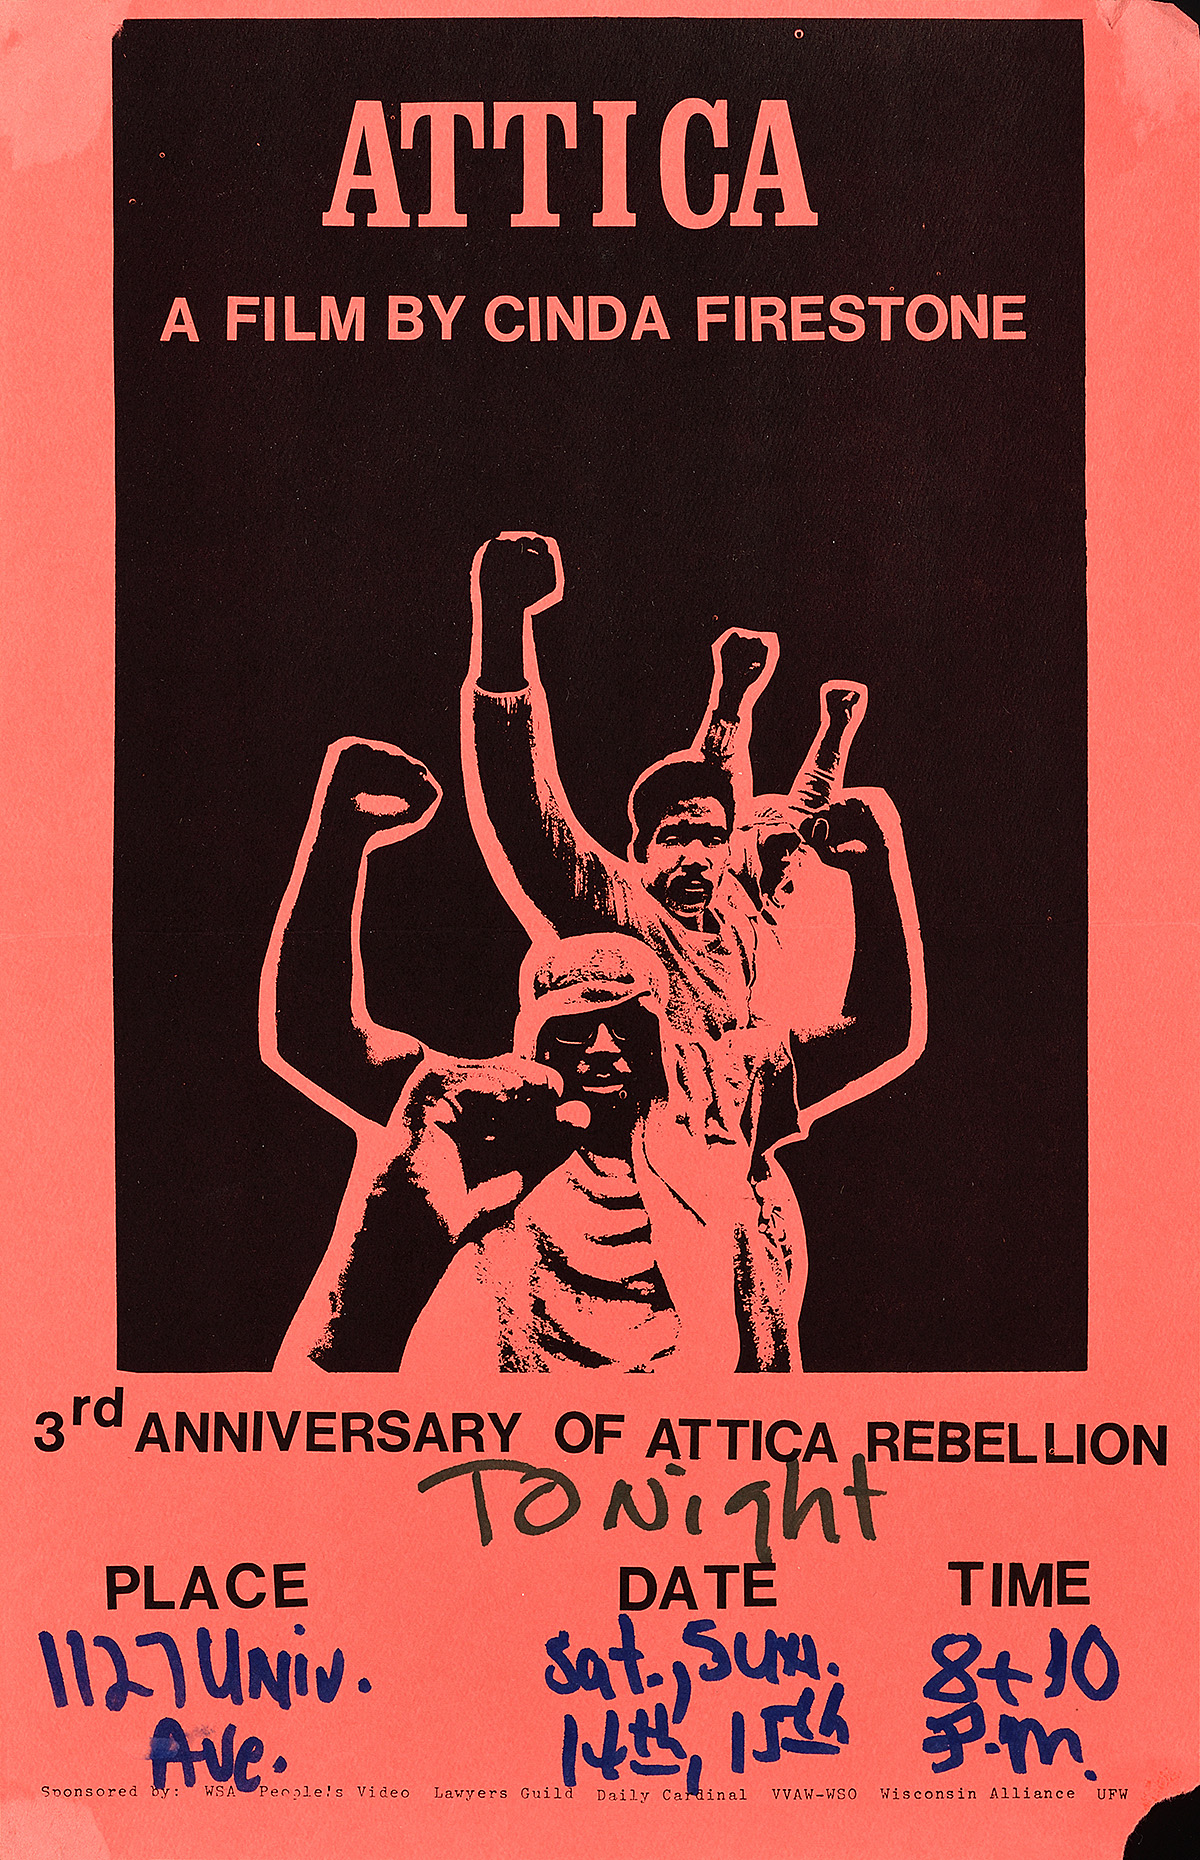 A salmon and black poster of 4 Black men with their fists in the air above film information text.